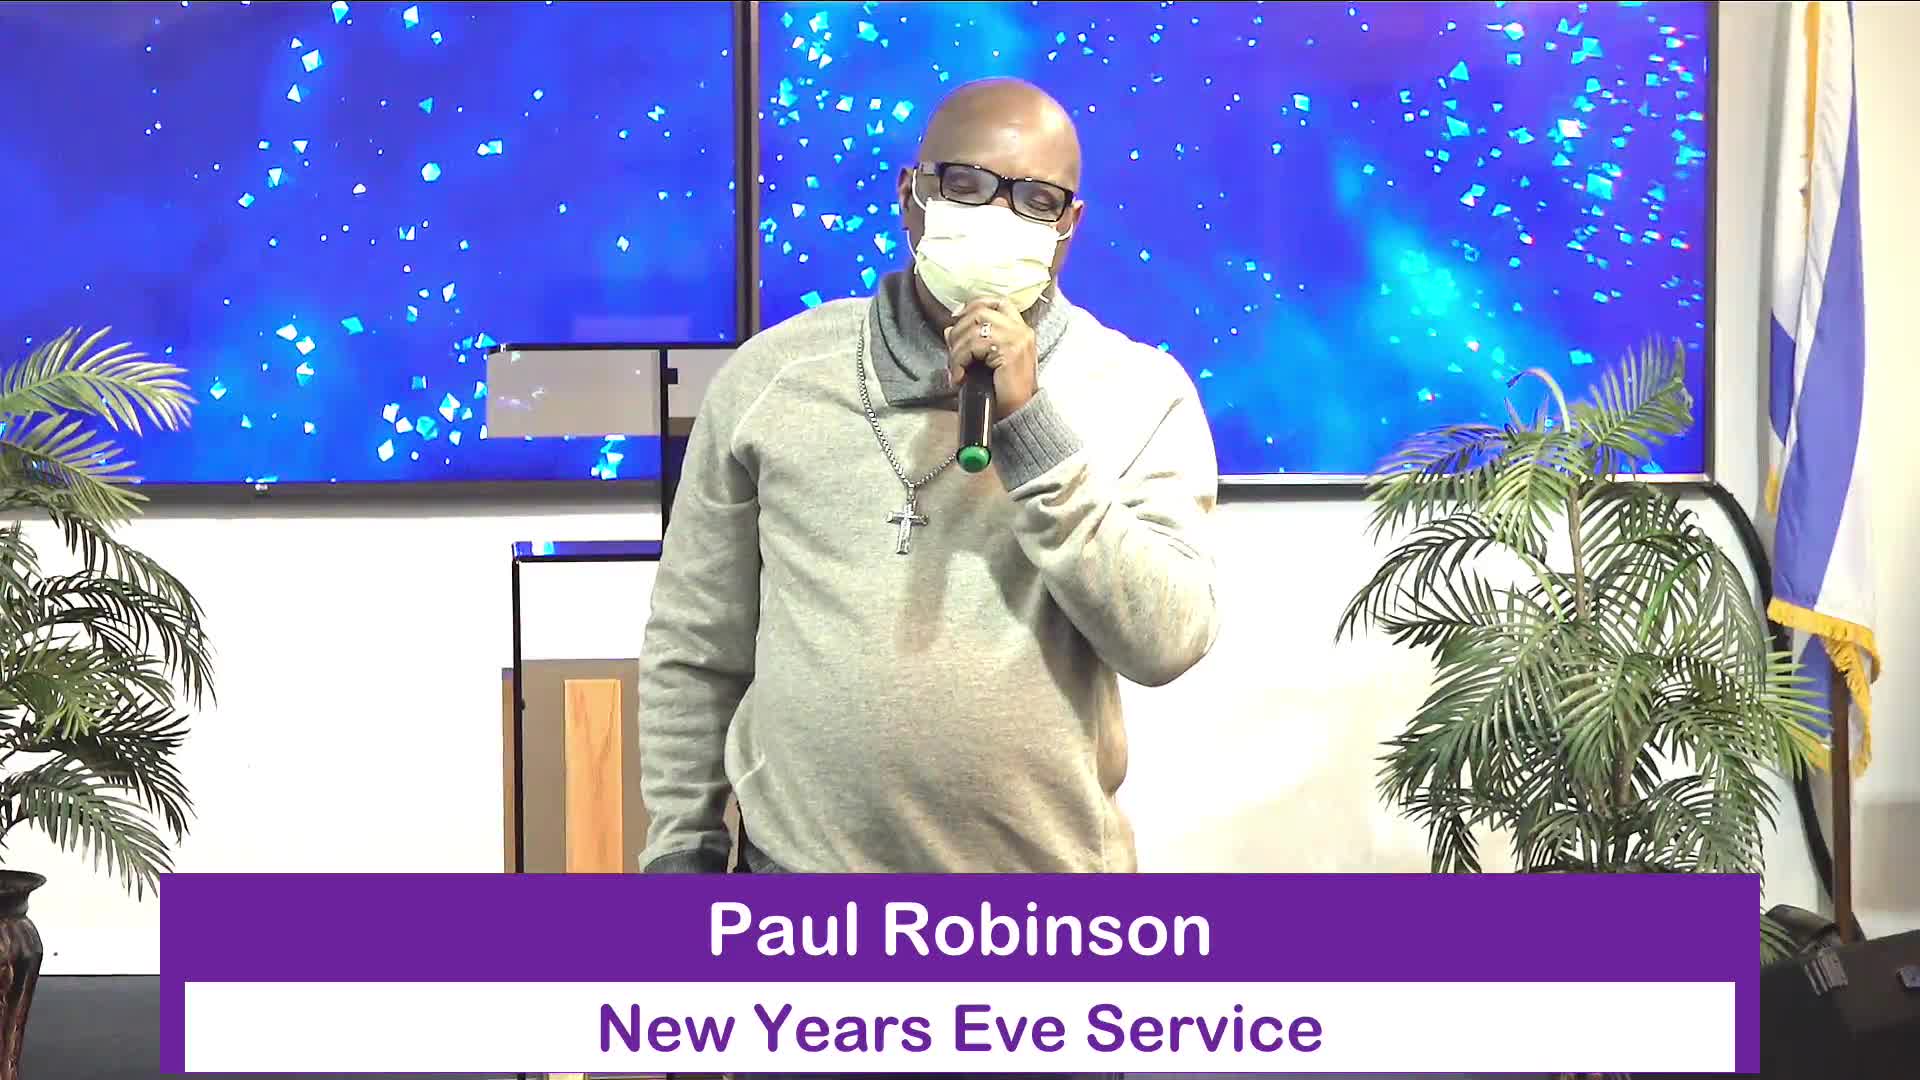 New Years Eve Service